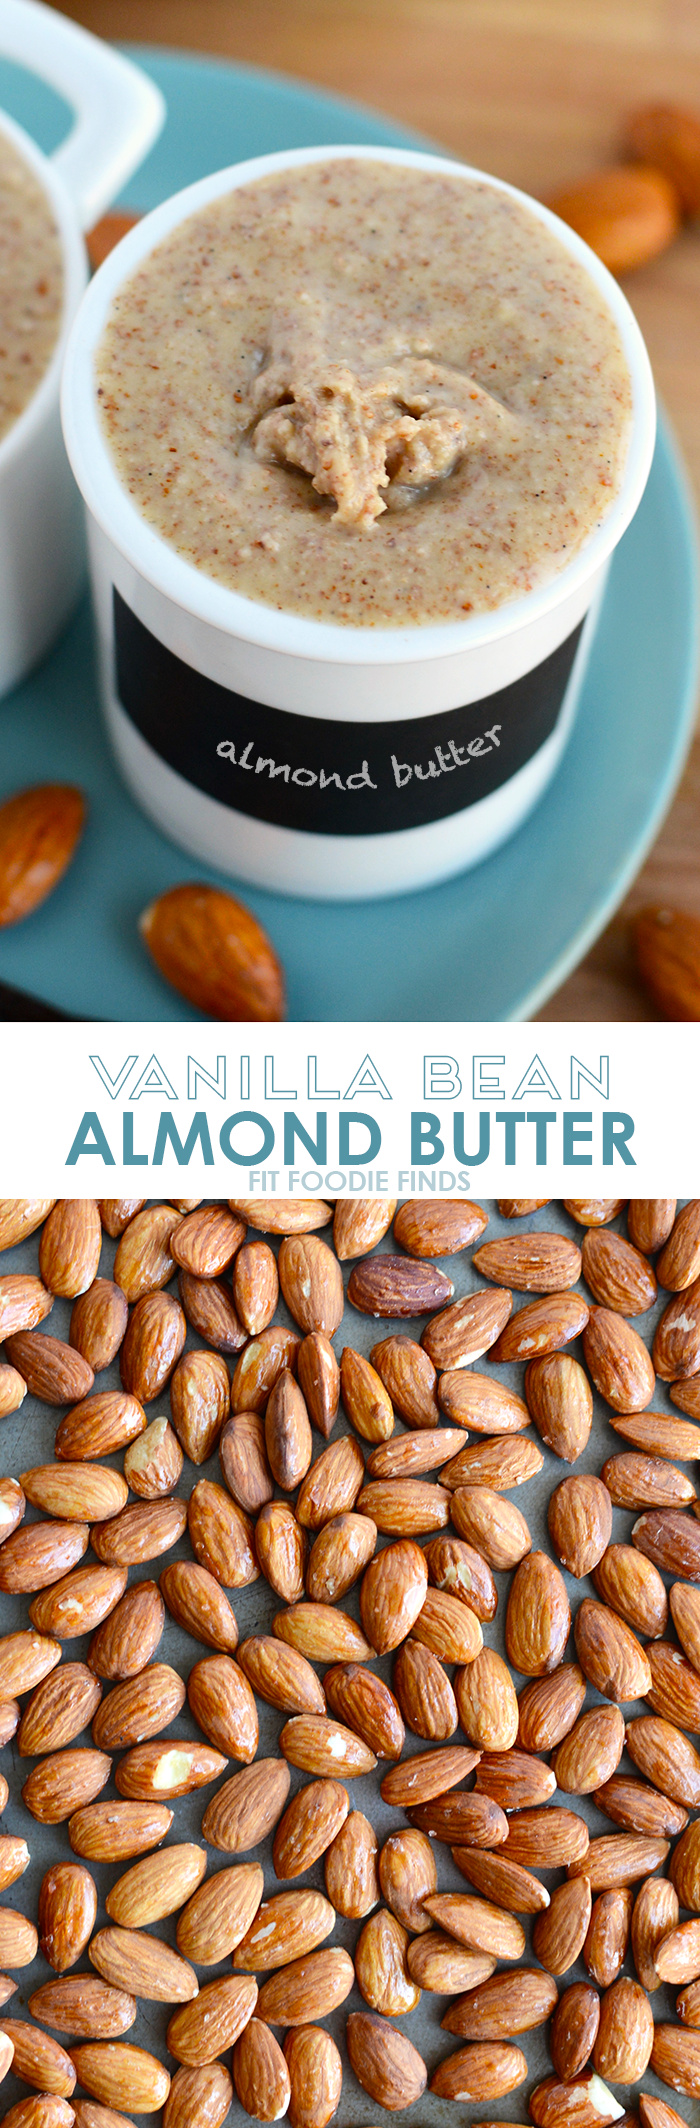 Make your own vanilla bean almond butter with just a few whole ingredients and a food processor. No additives involved or refined